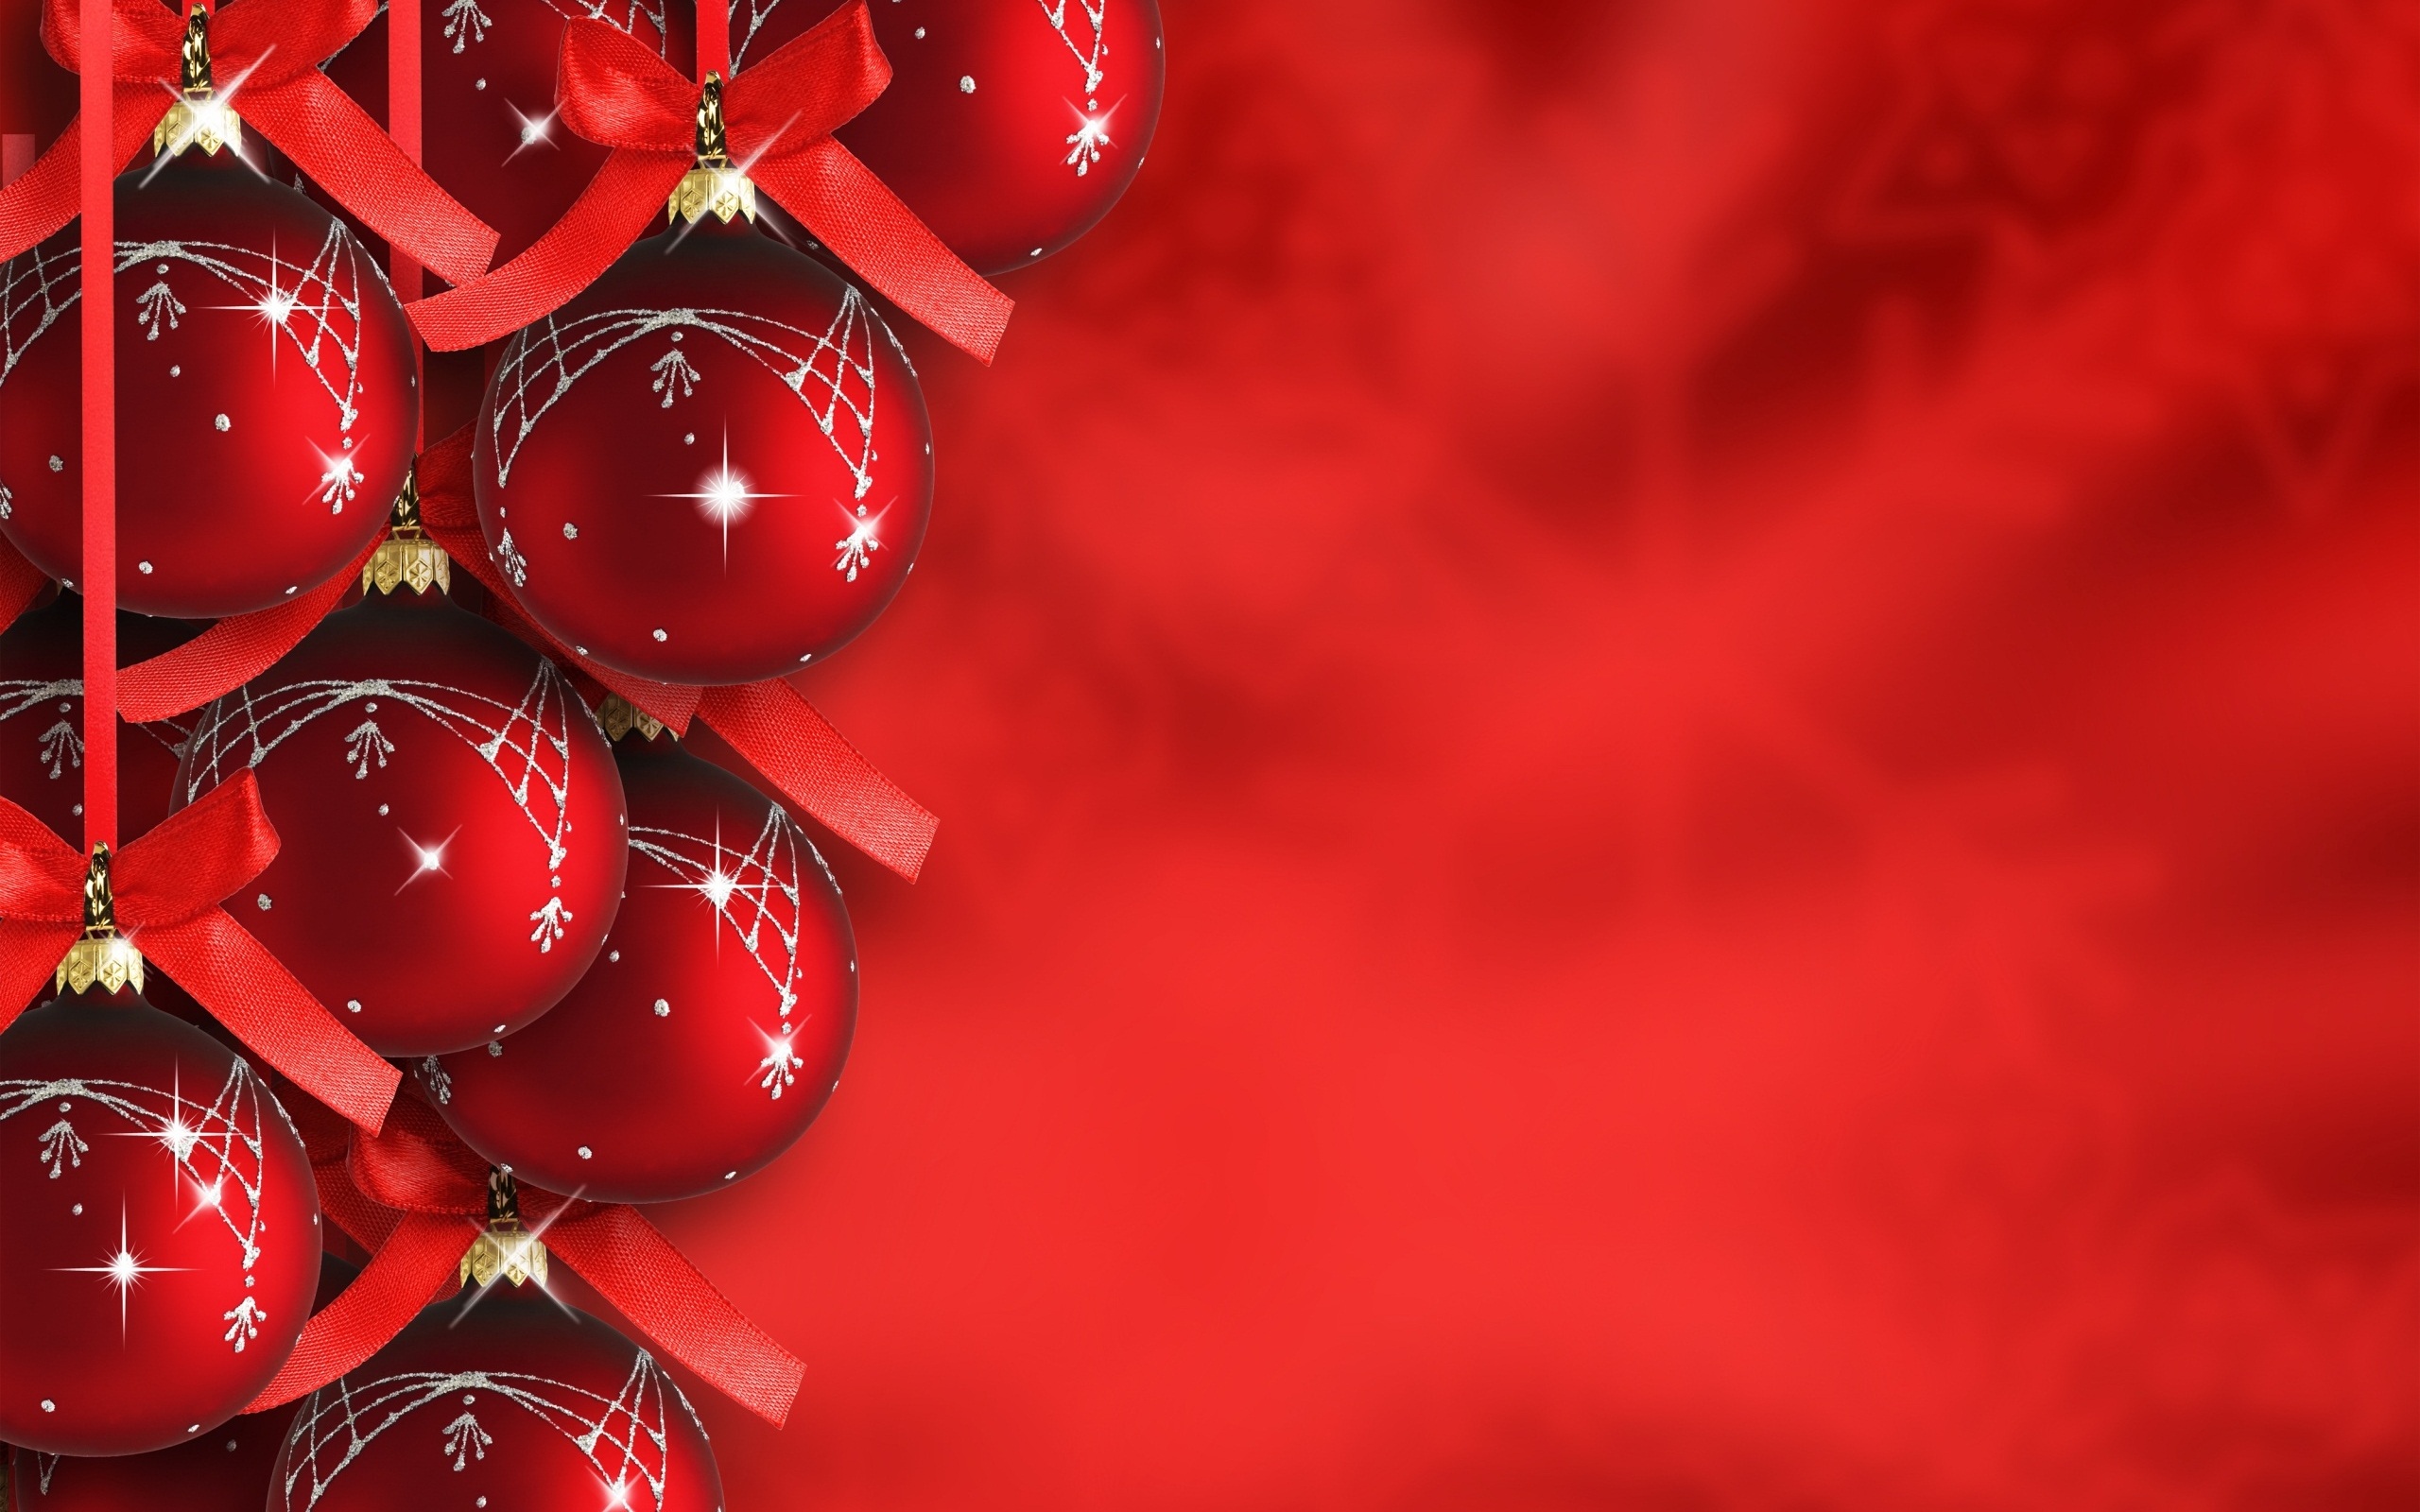 Christmas Background Wallpaper | Wallpapers9